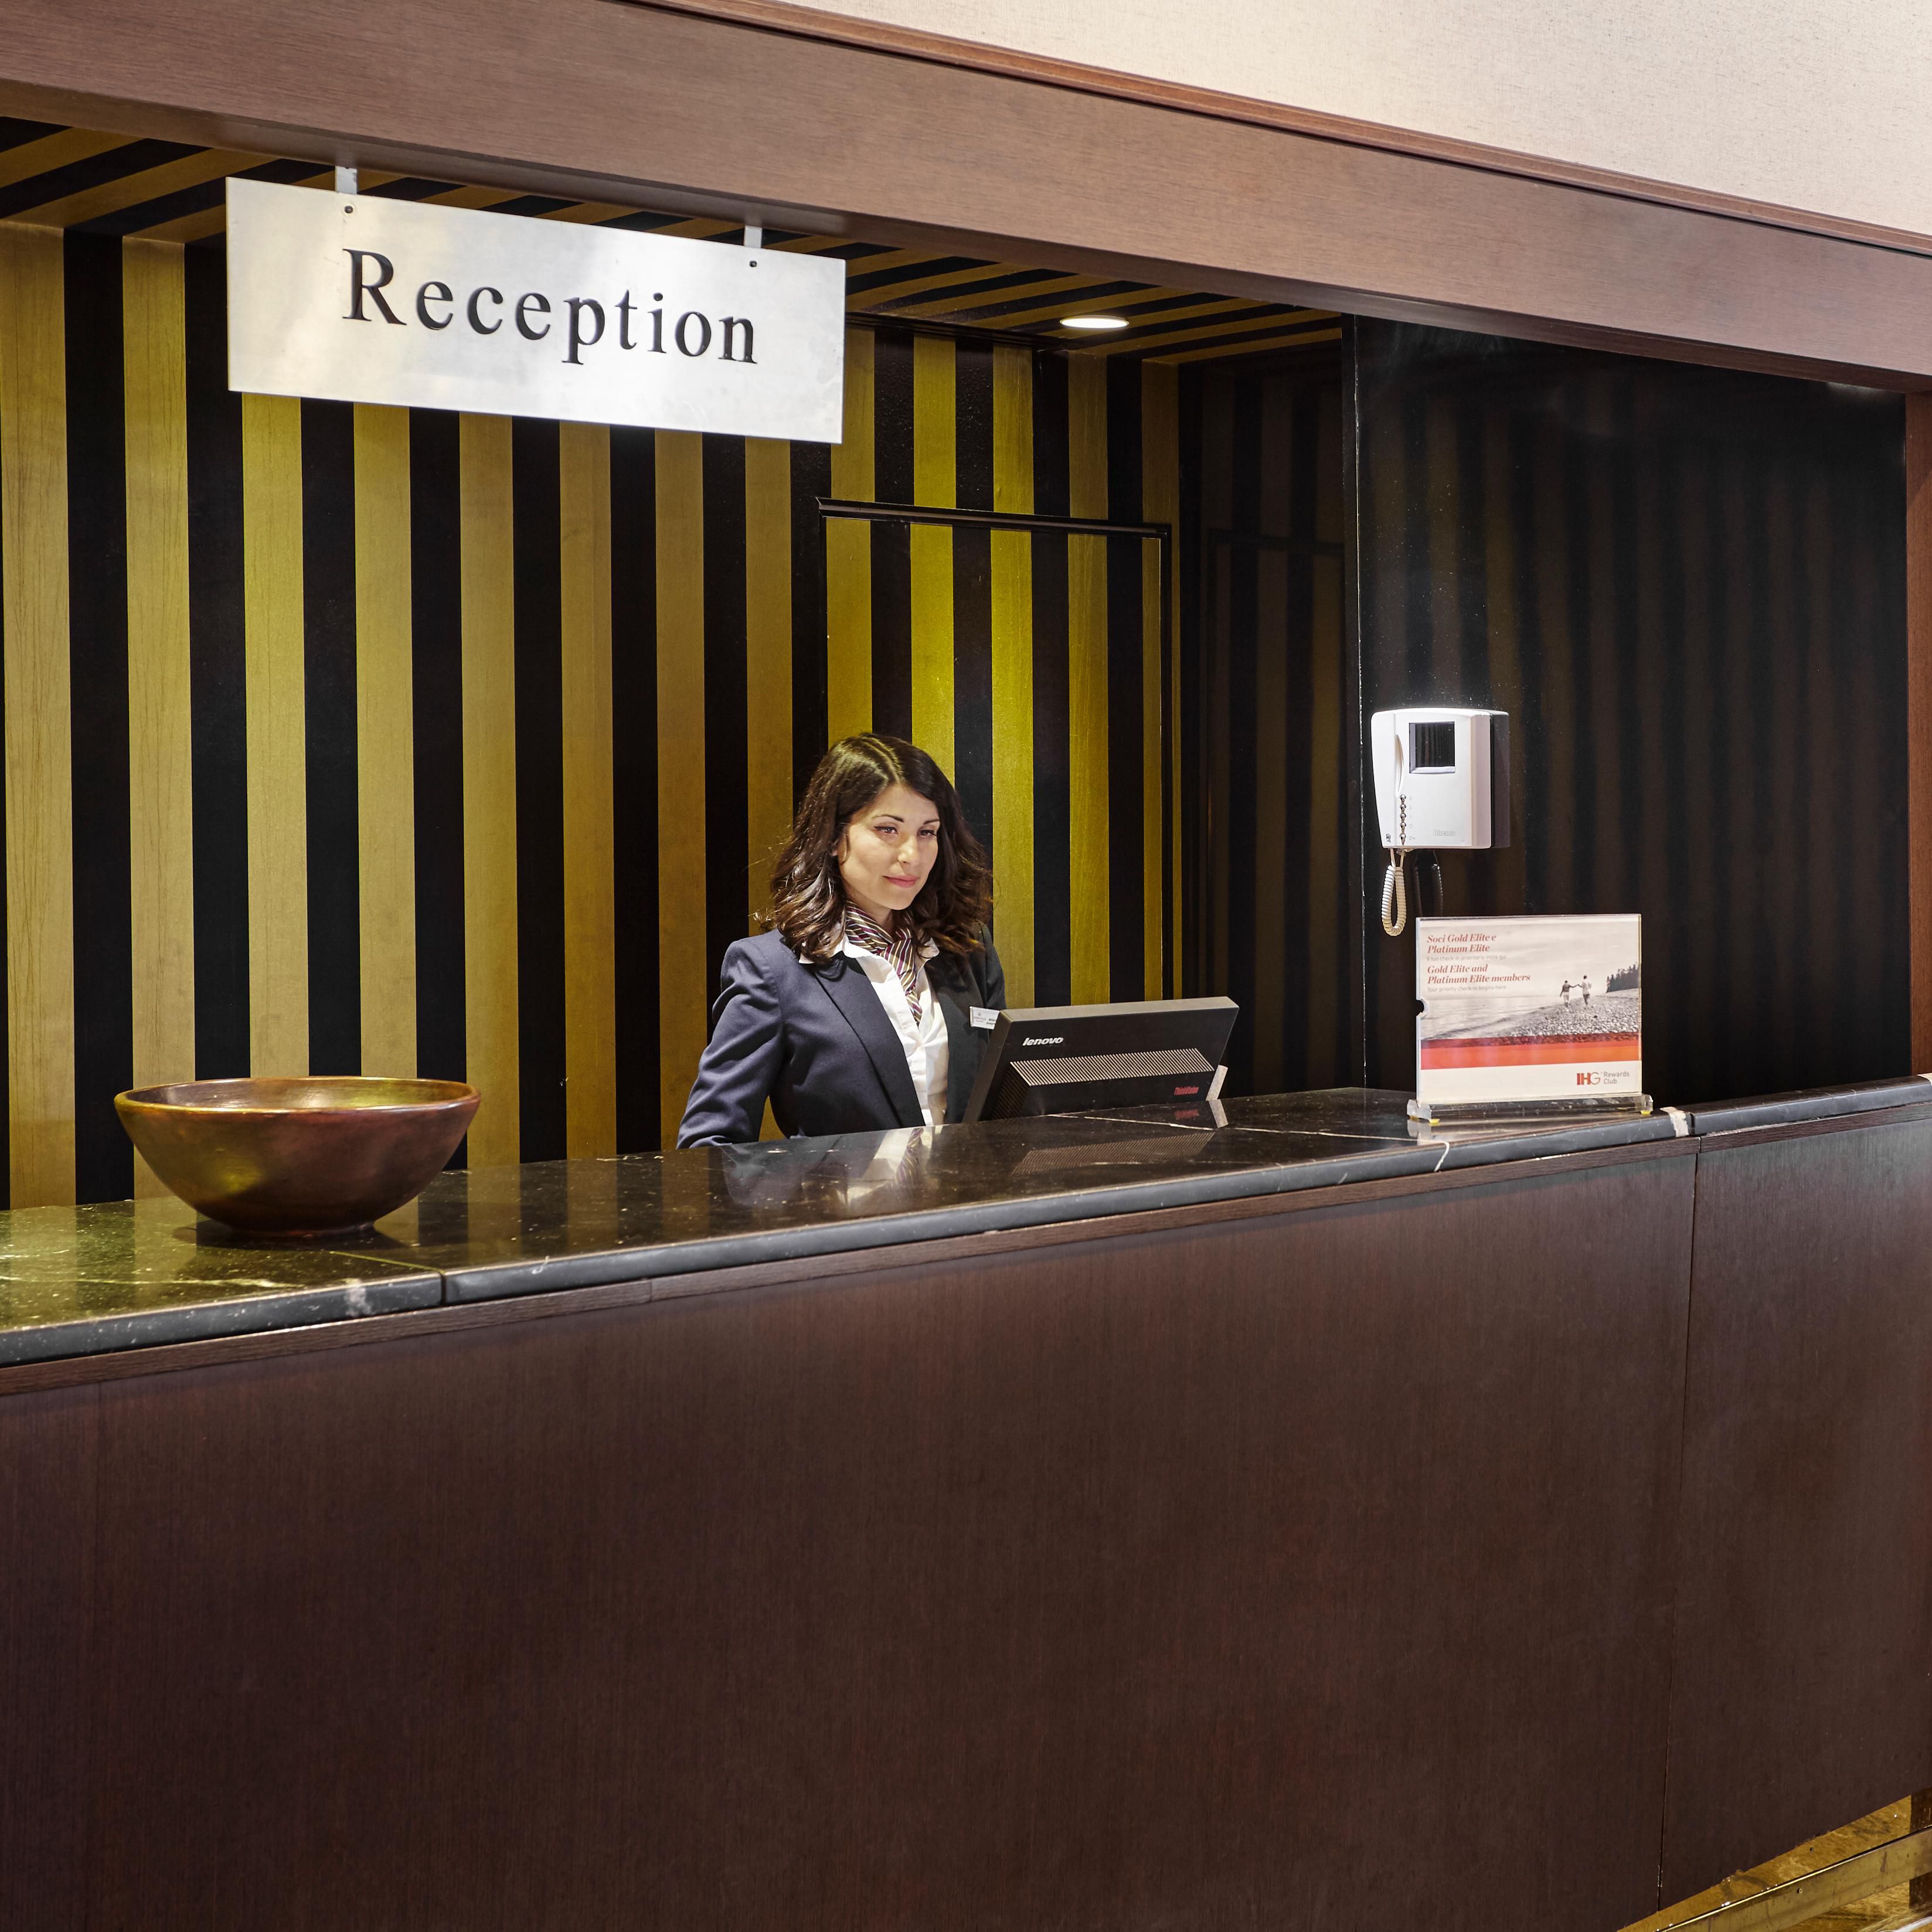 Our multilanguage speaking staff will welcome you upon arrival